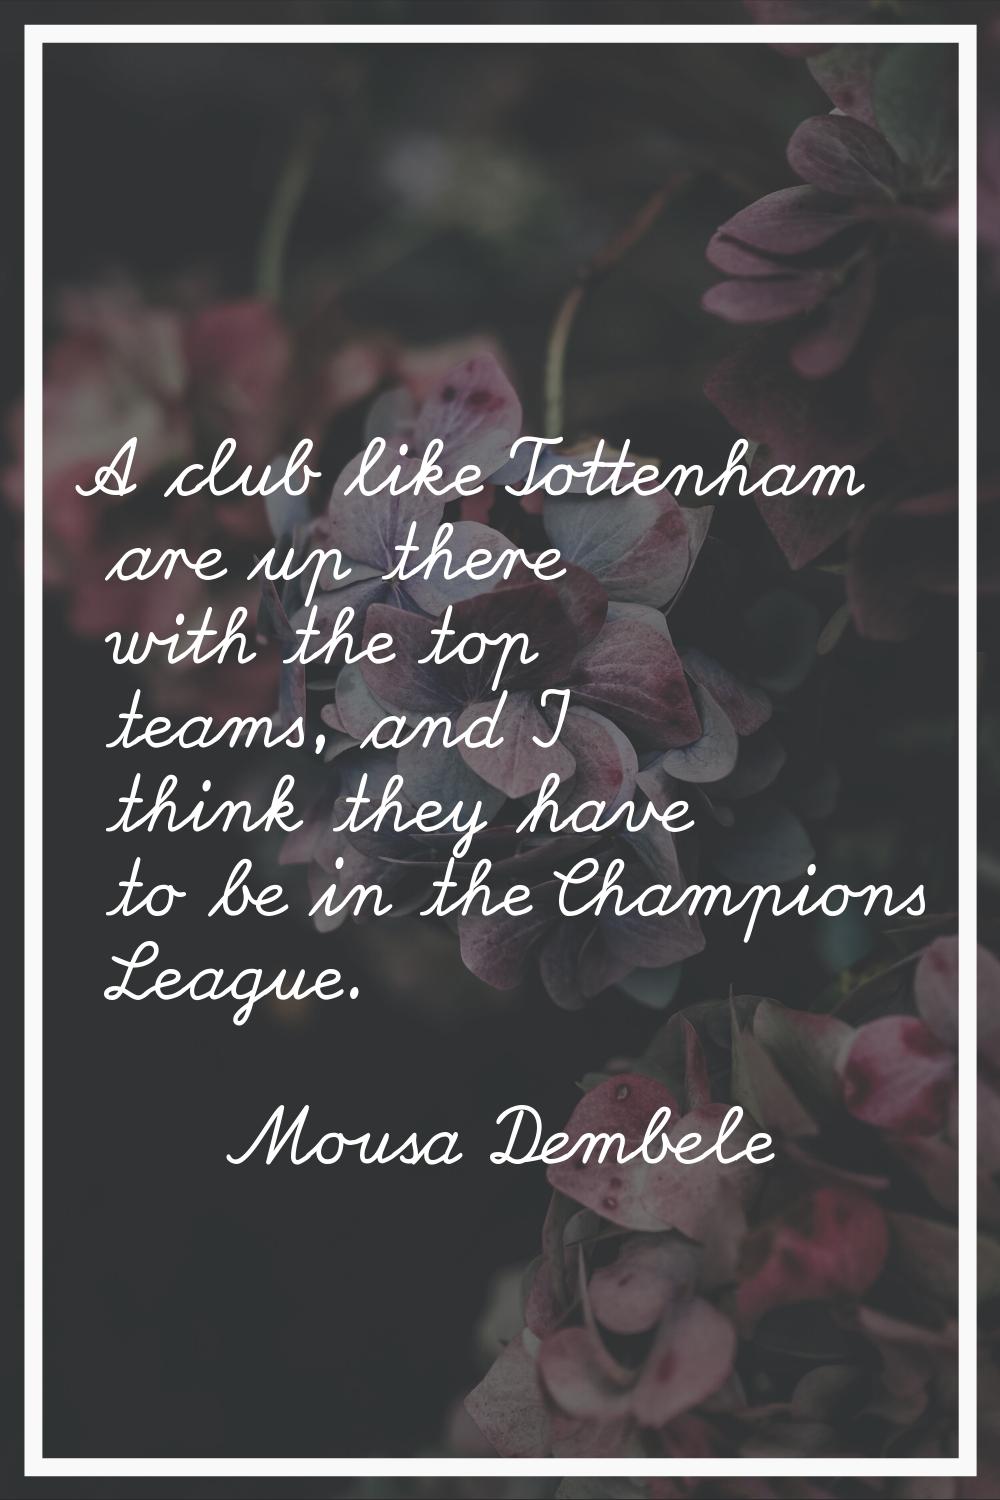 A club like Tottenham are up there with the top teams, and I think they have to be in the Champions